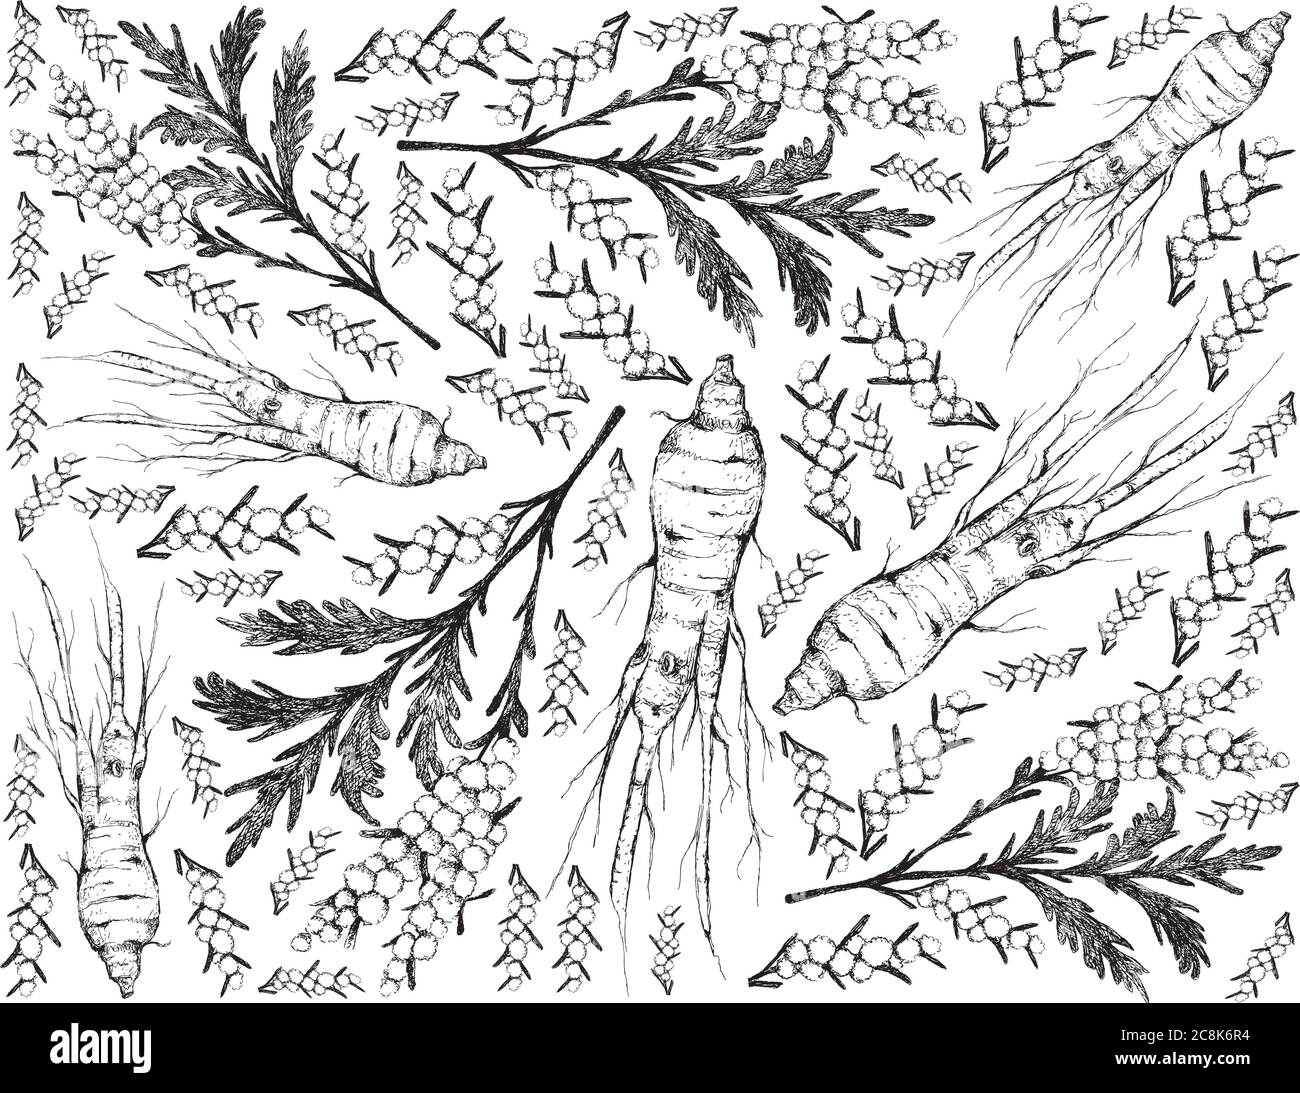 Herbal Flower and Plant, Hand Drawn Illustration of Artemisia Absinthium or Wormwood Plants and Ginseng Root Used for Traditional Medicine. Stock Vector